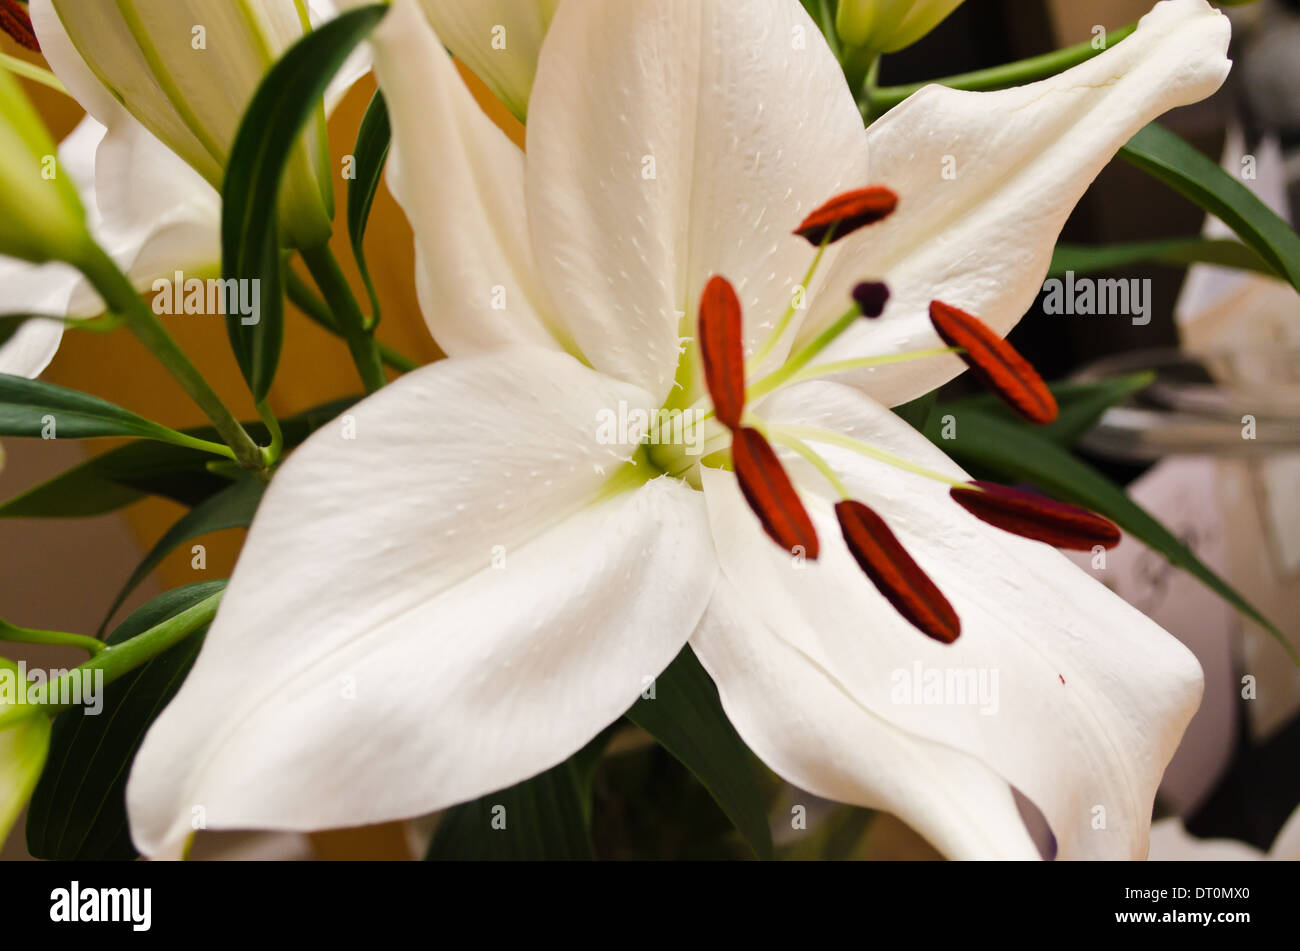 Lily flower and red anthers Stock Photo